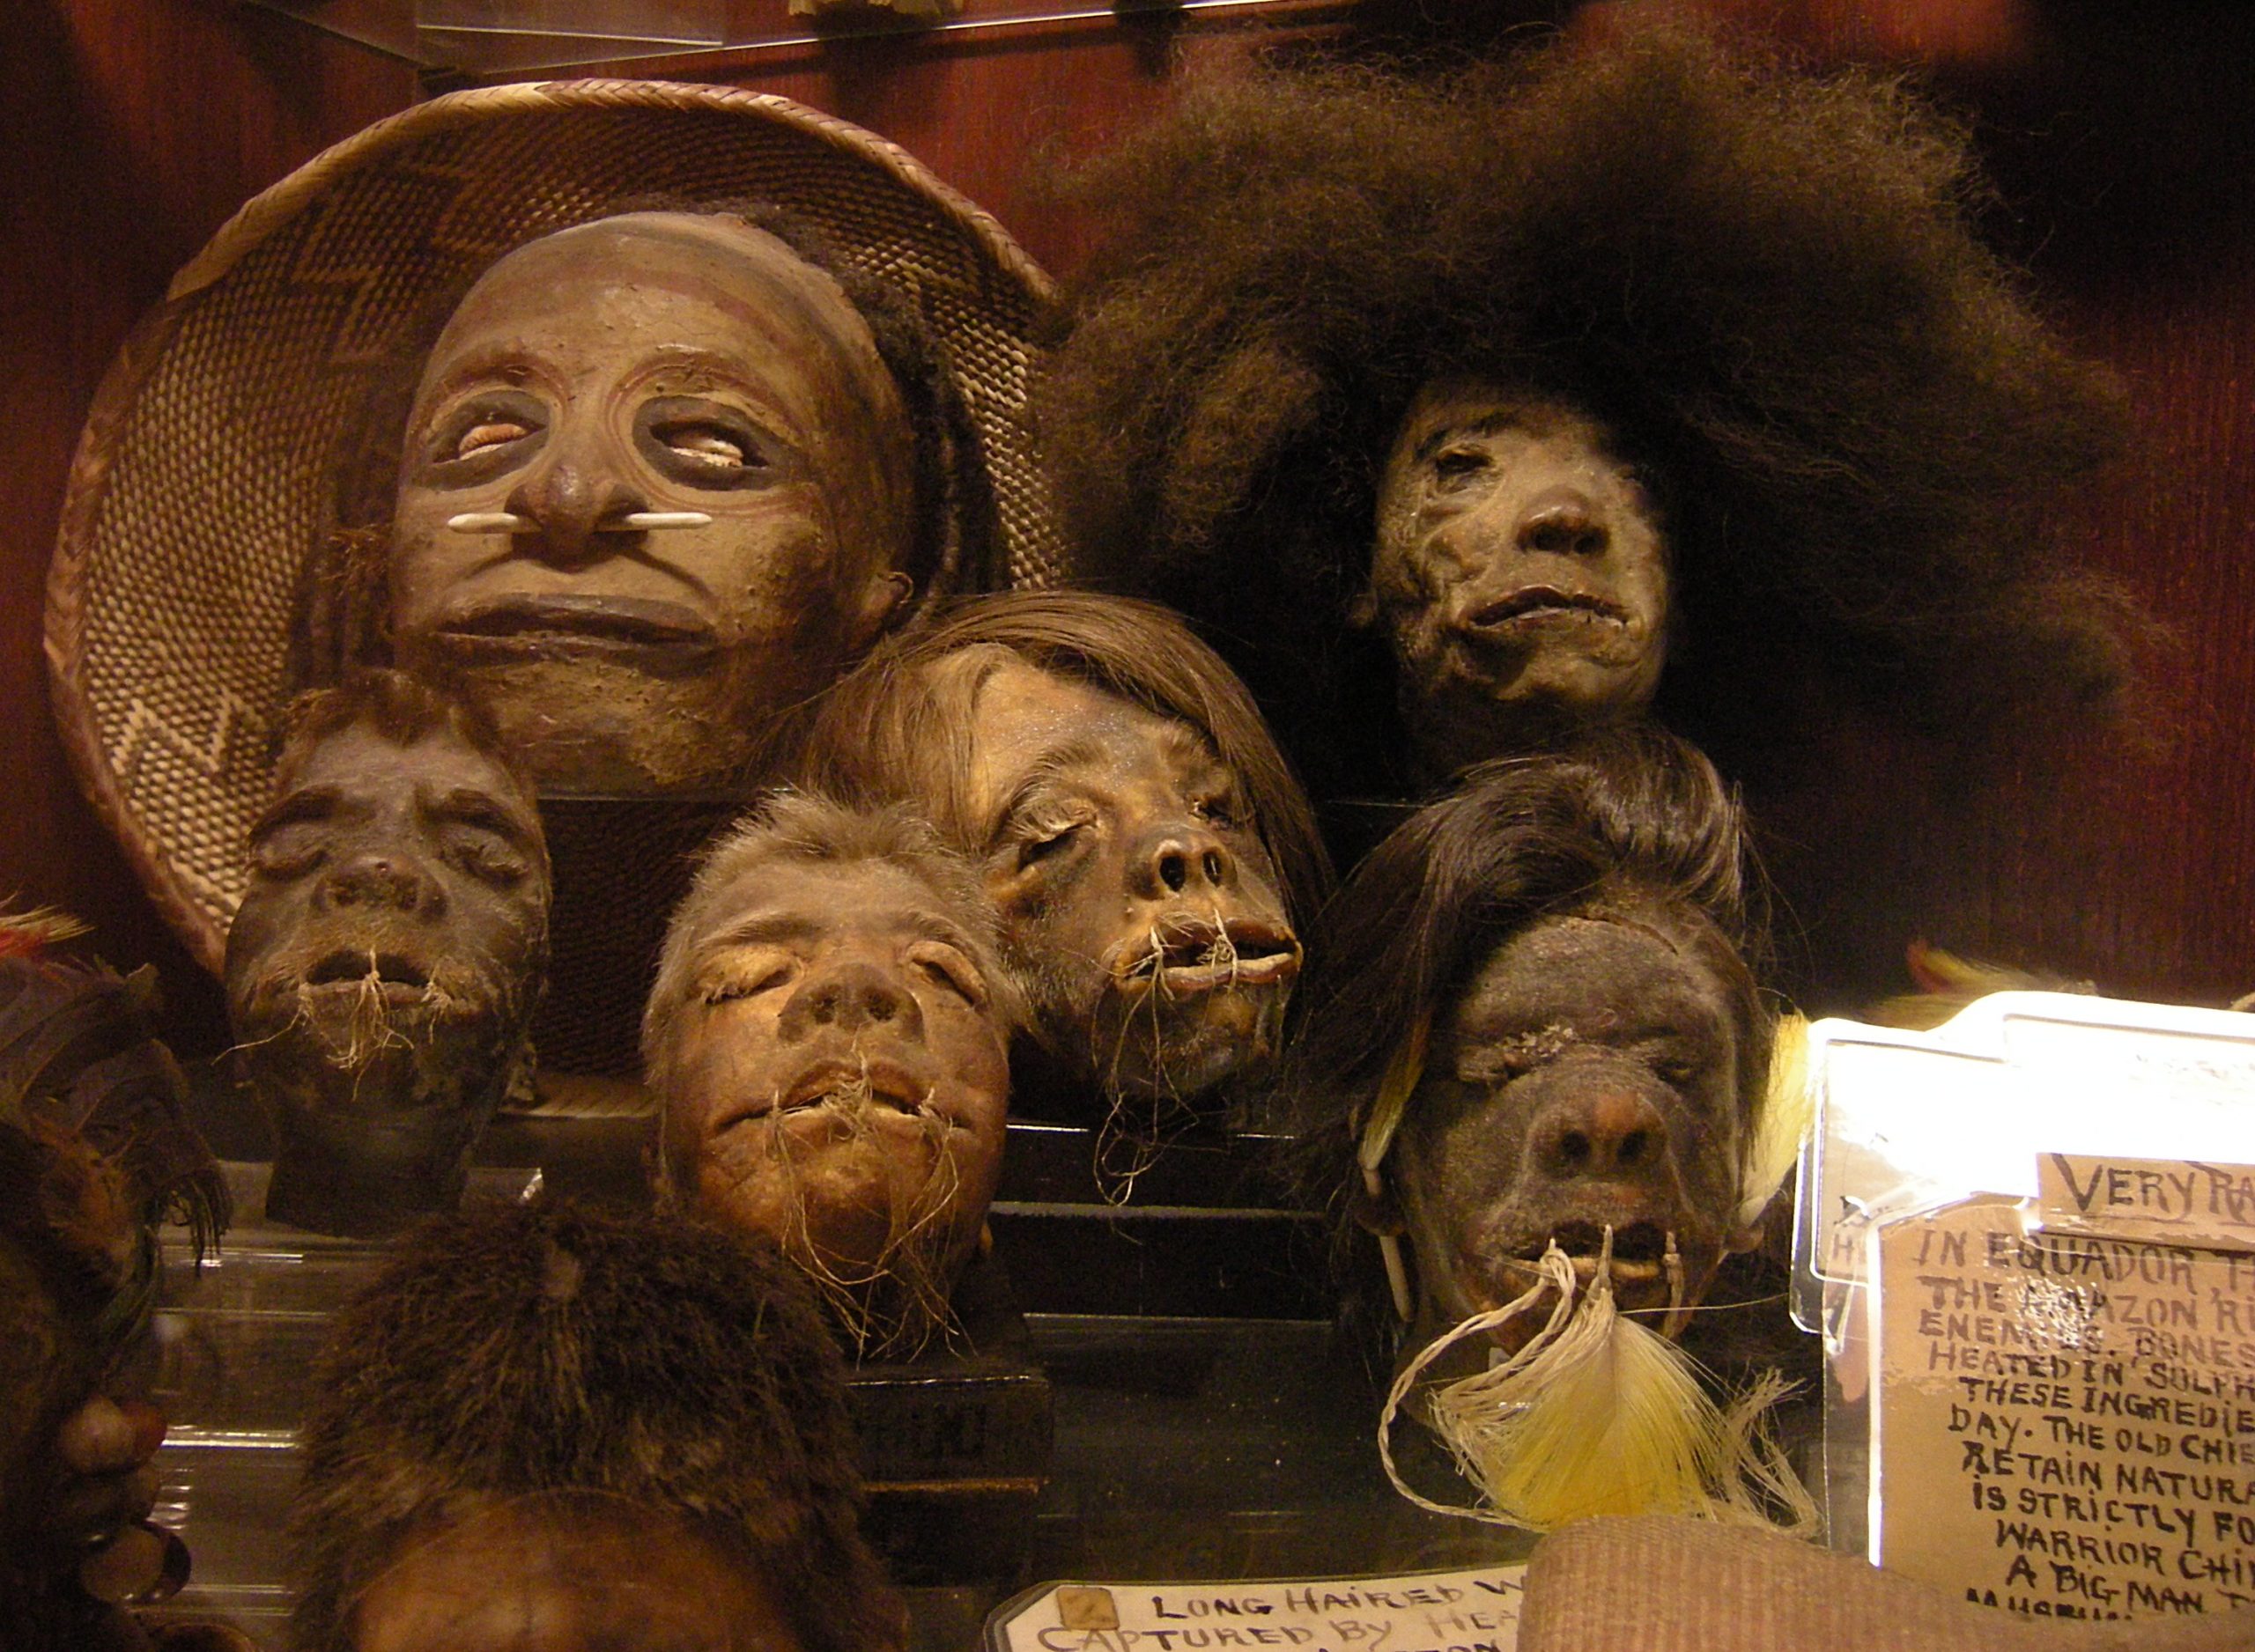 shrunken-heads-from-the-permanent-collection-of-Ye-Olde-Curiosity-Shop-scaled-7